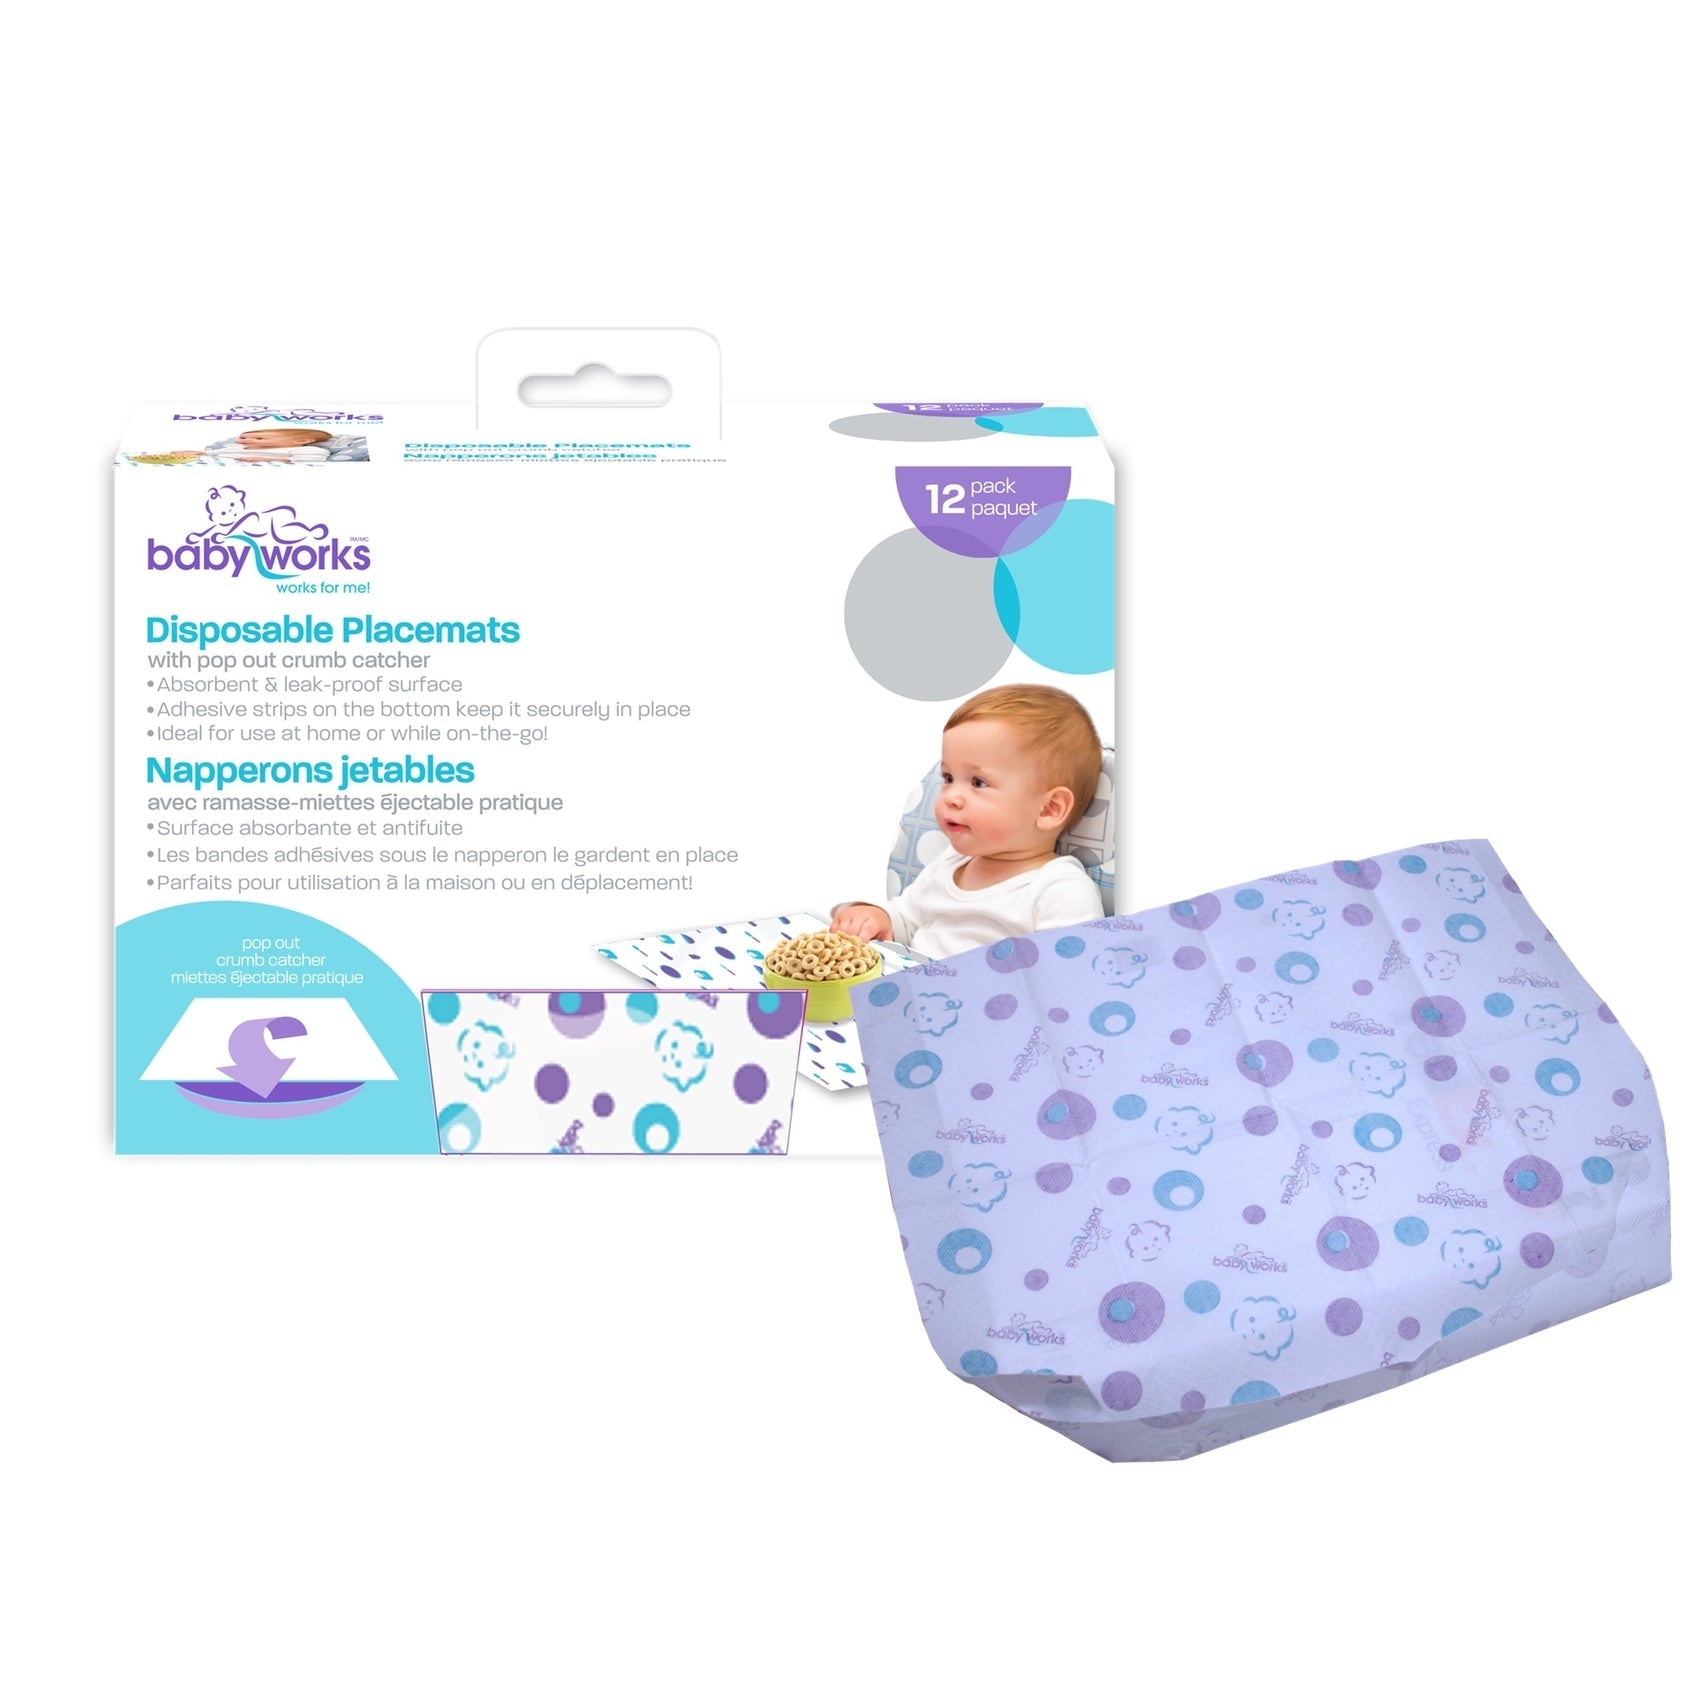 Baby Works - Disposable Placemats with Crumb Catcher  - (Pack of 12)